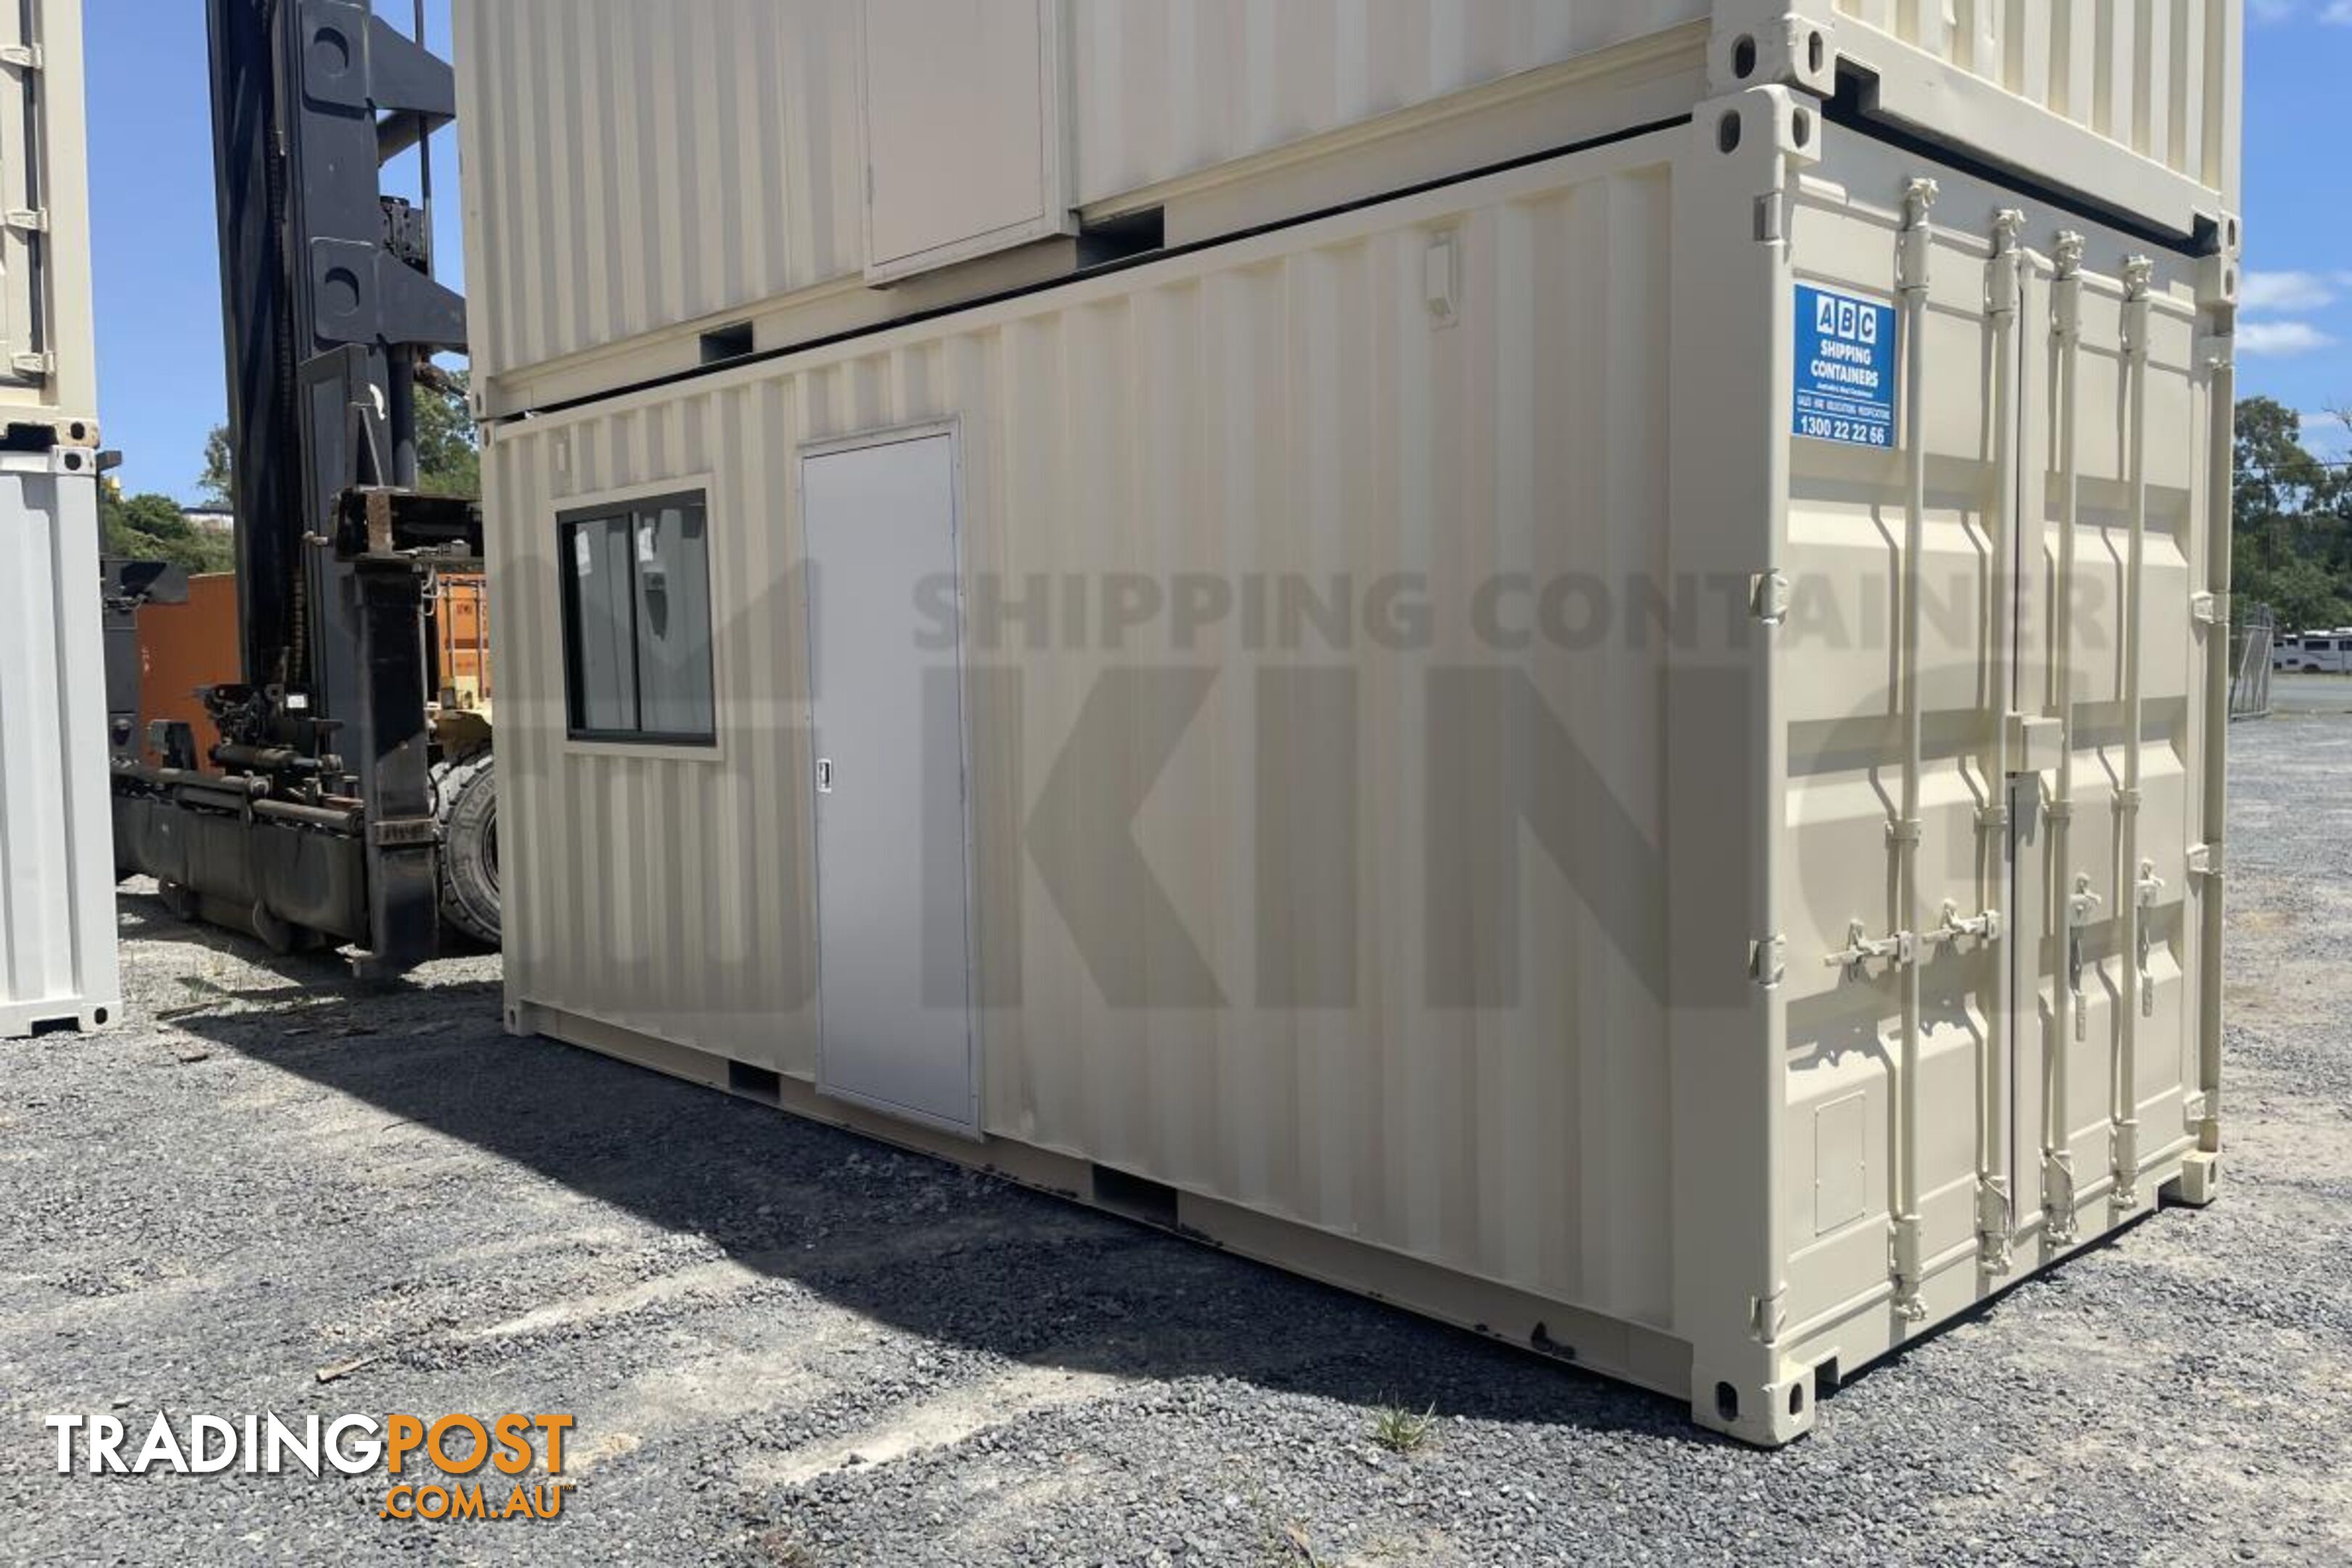 20' SHIPPING CONTAINER OFFICE "BUDGET BARRY" (BUDGET)